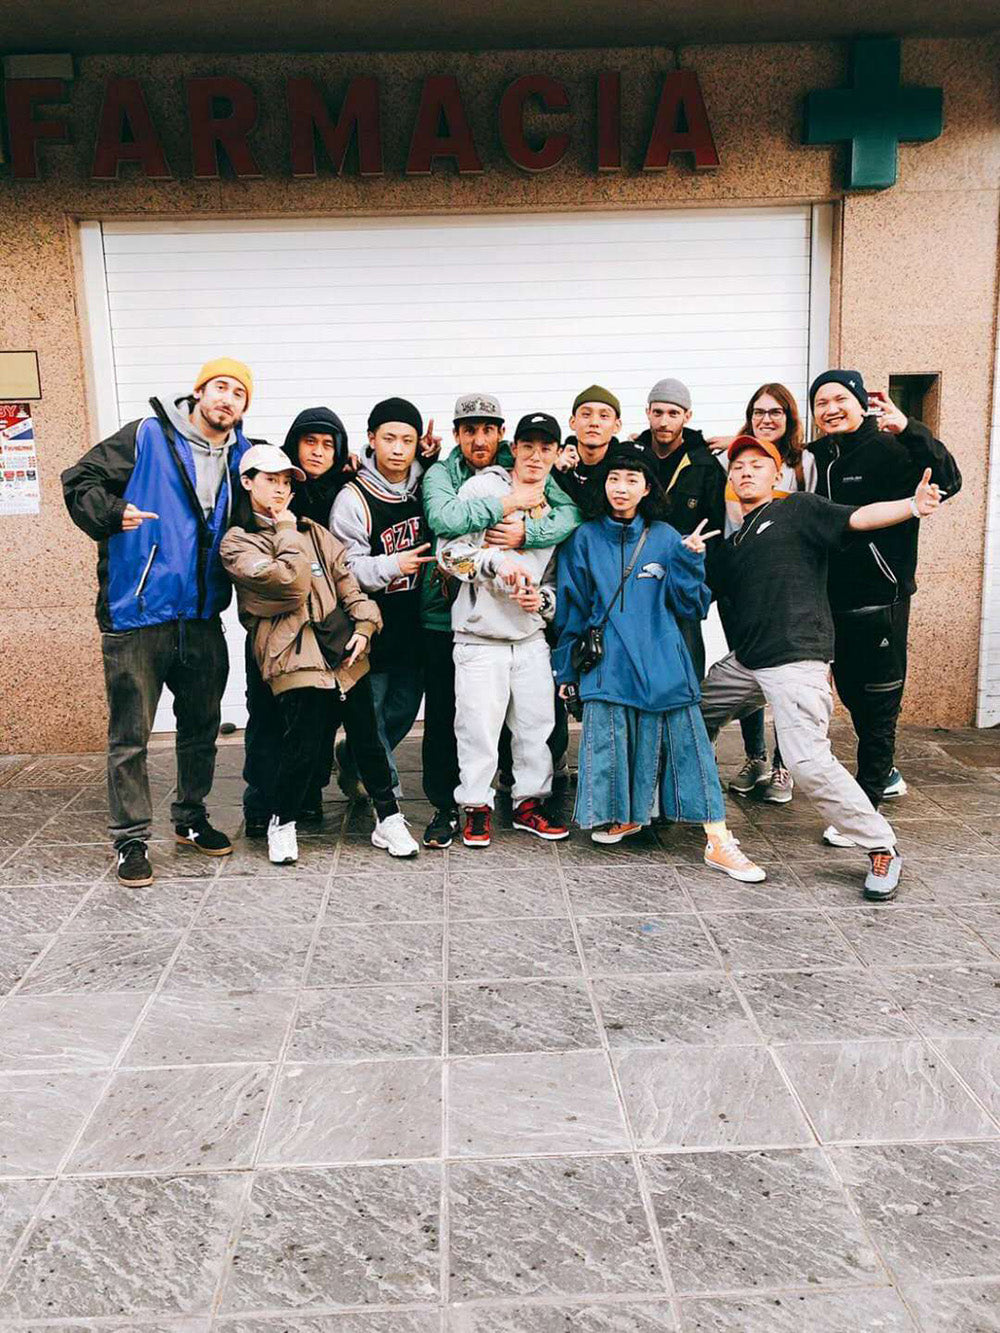 Mike Magik and Taiwanese crew in Spain